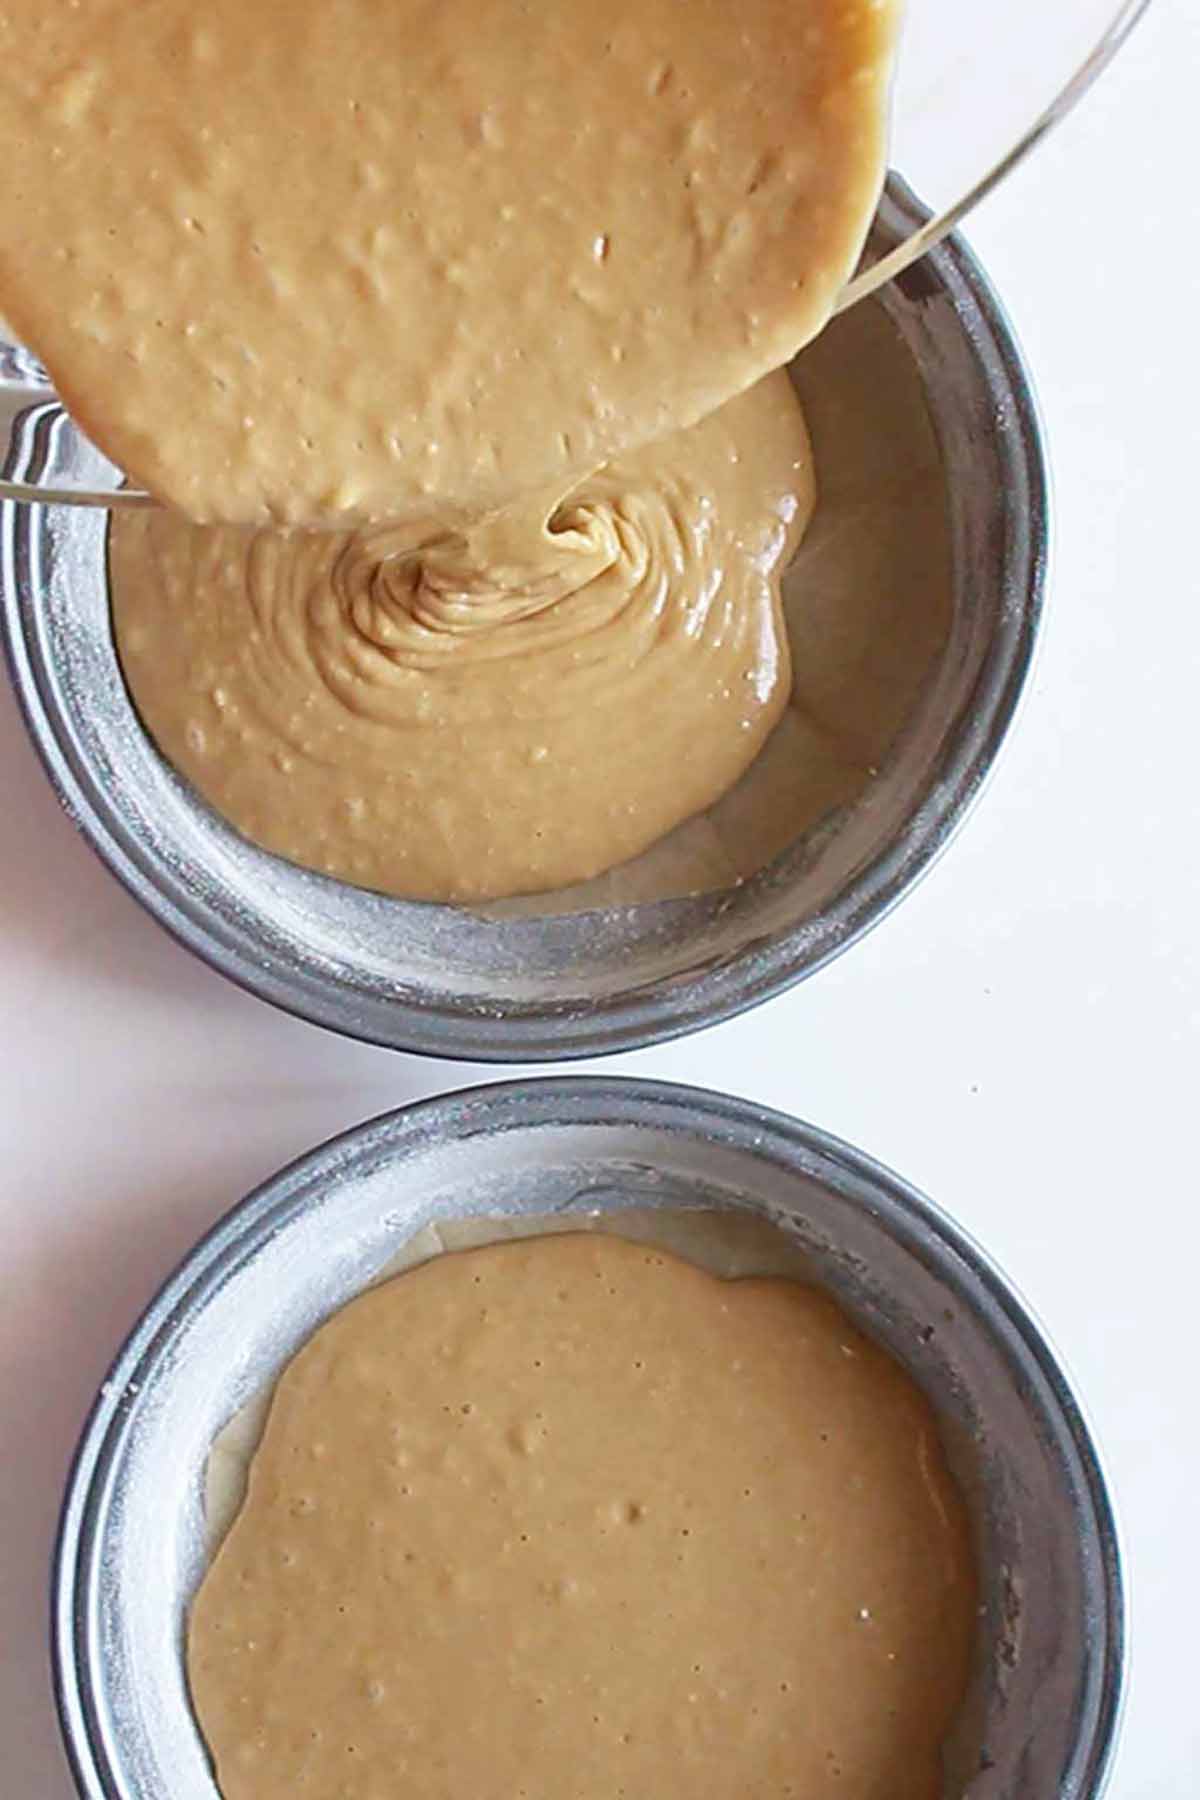 Pouring Dairy Free Cake Batter Into Tins